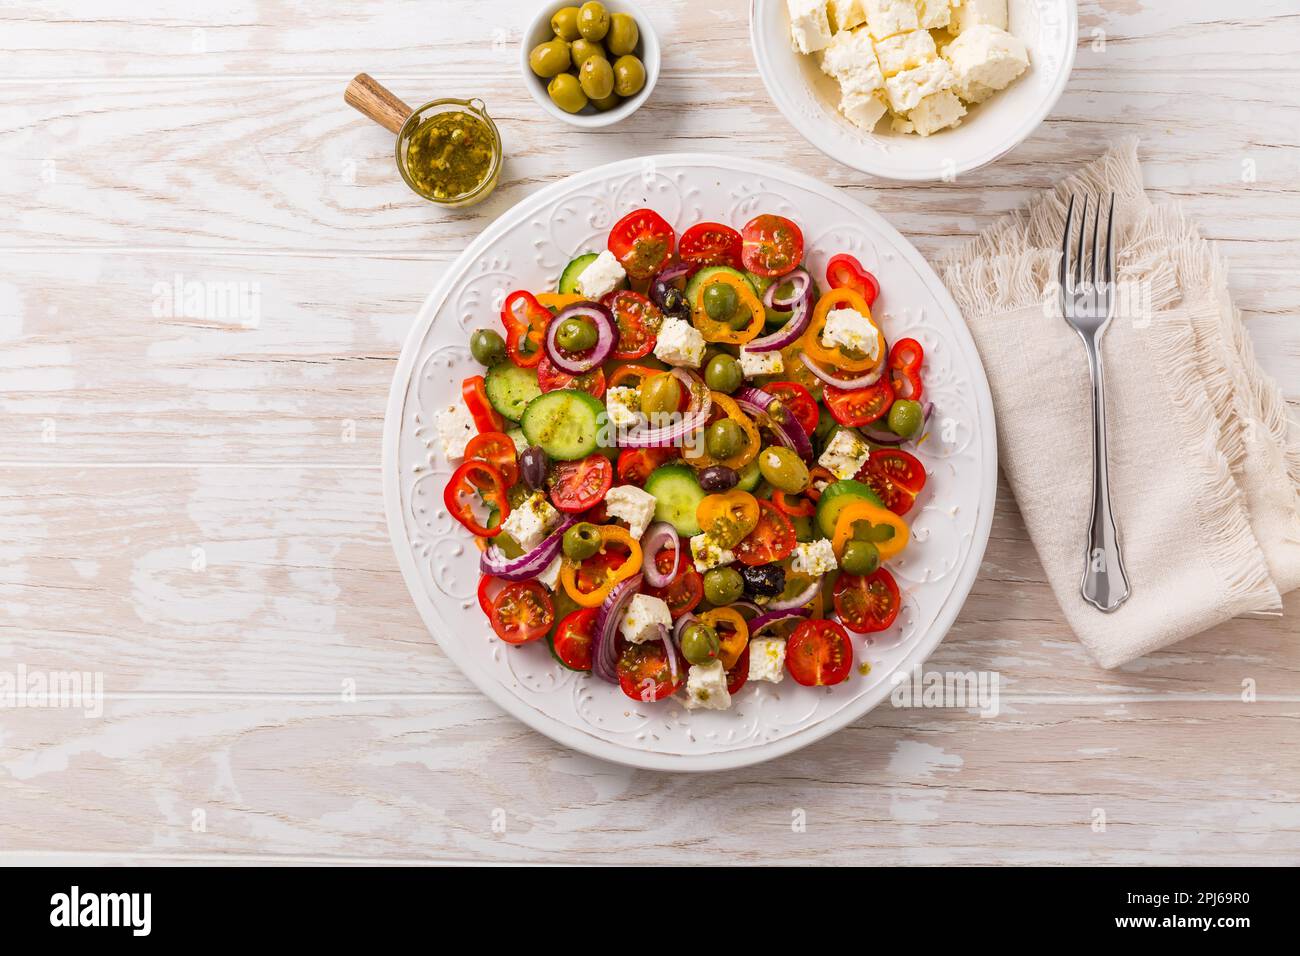 Greek salad of fresh cucumber, tomato, sweet pepper, lettuce, red onion, feta cheese and olives with olive oil dressing. Healthy food, top view Stock Photo